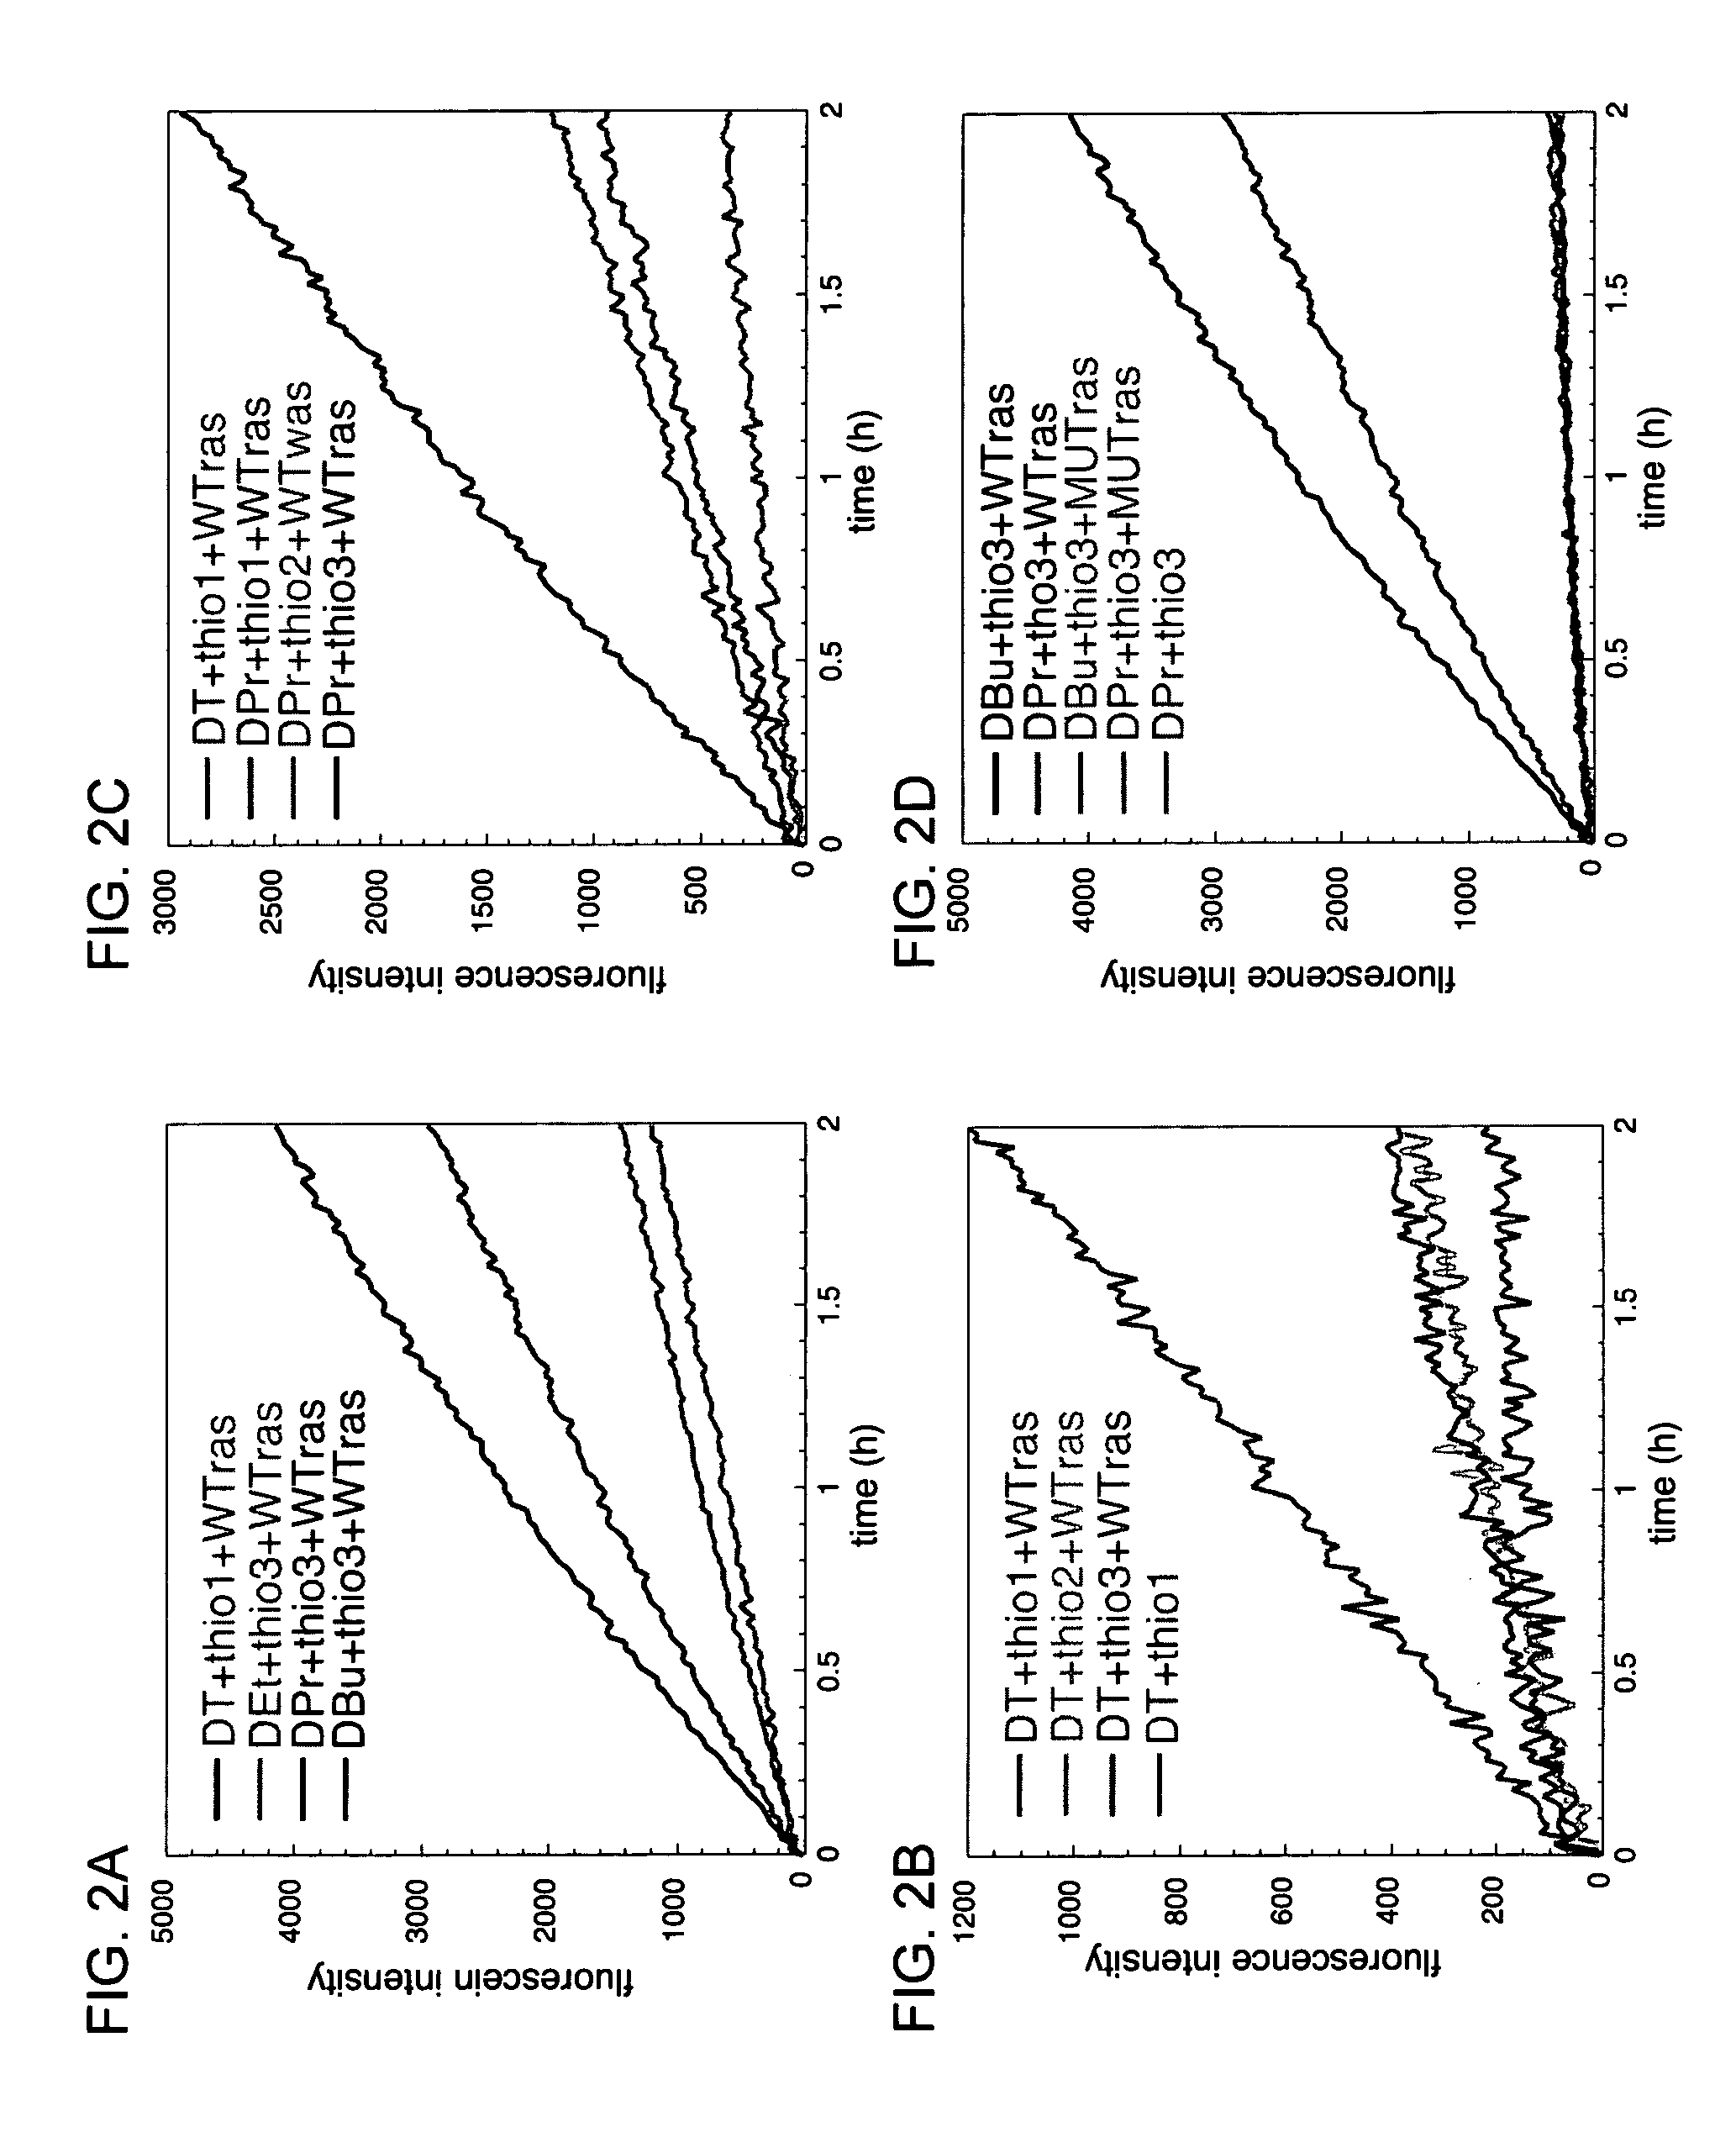 Universal linker compositions for the release or transfer of chemical agents from a polynucleotide